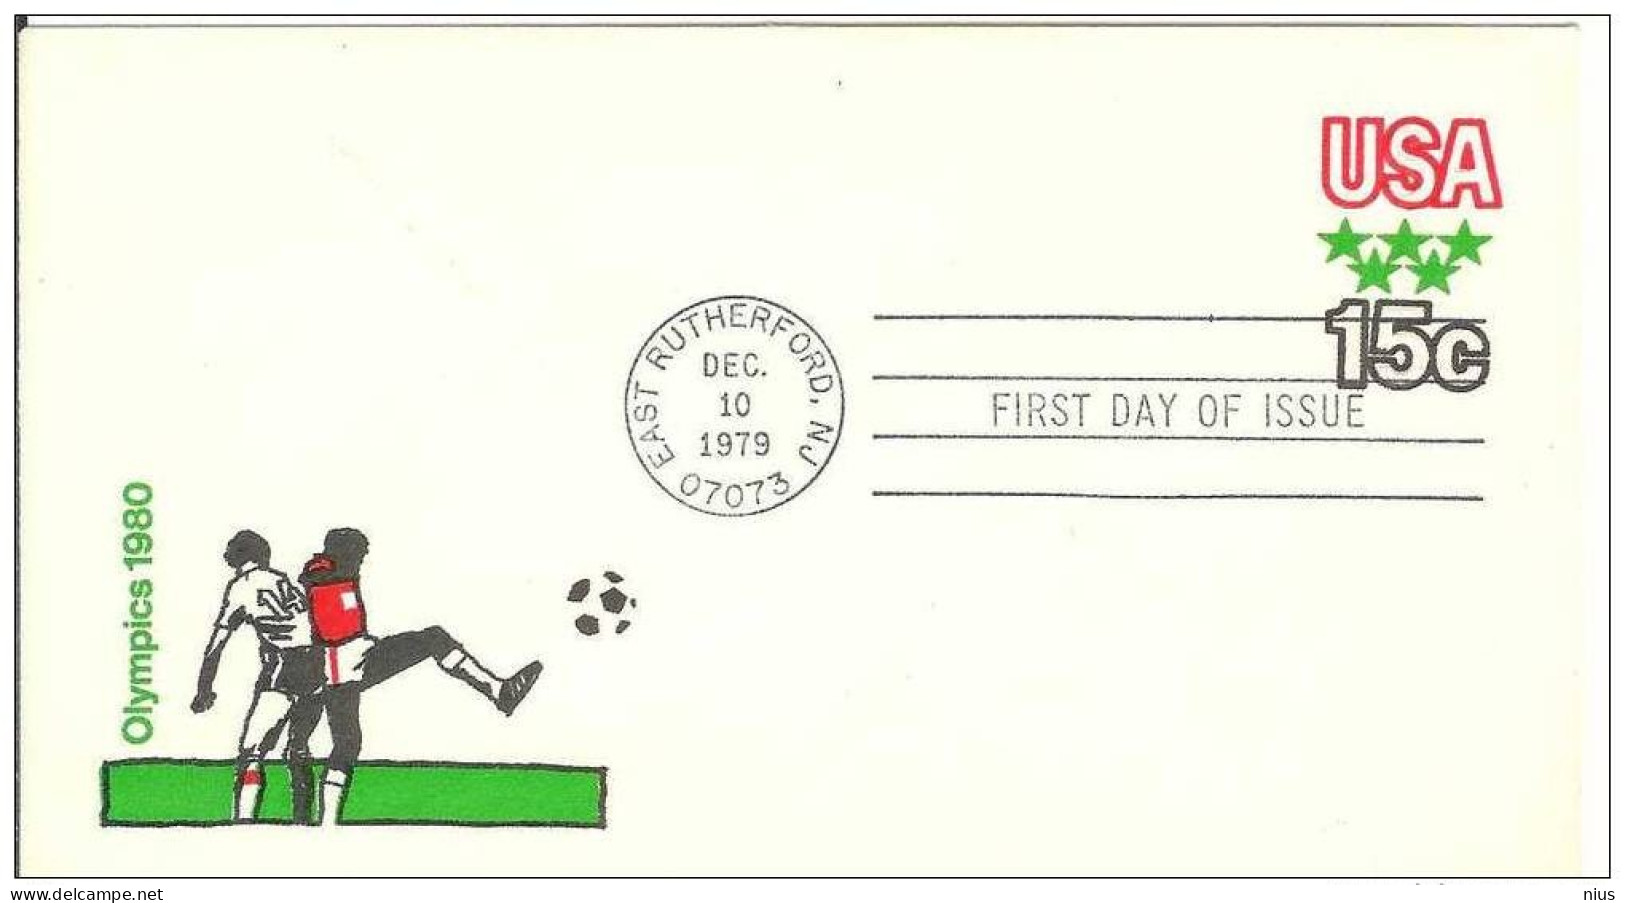 USA FDC 1979 Olympic Games, Football Soccer Fussball FIFA 1980, Canceled In East Rutherford NJ - 1971-1980